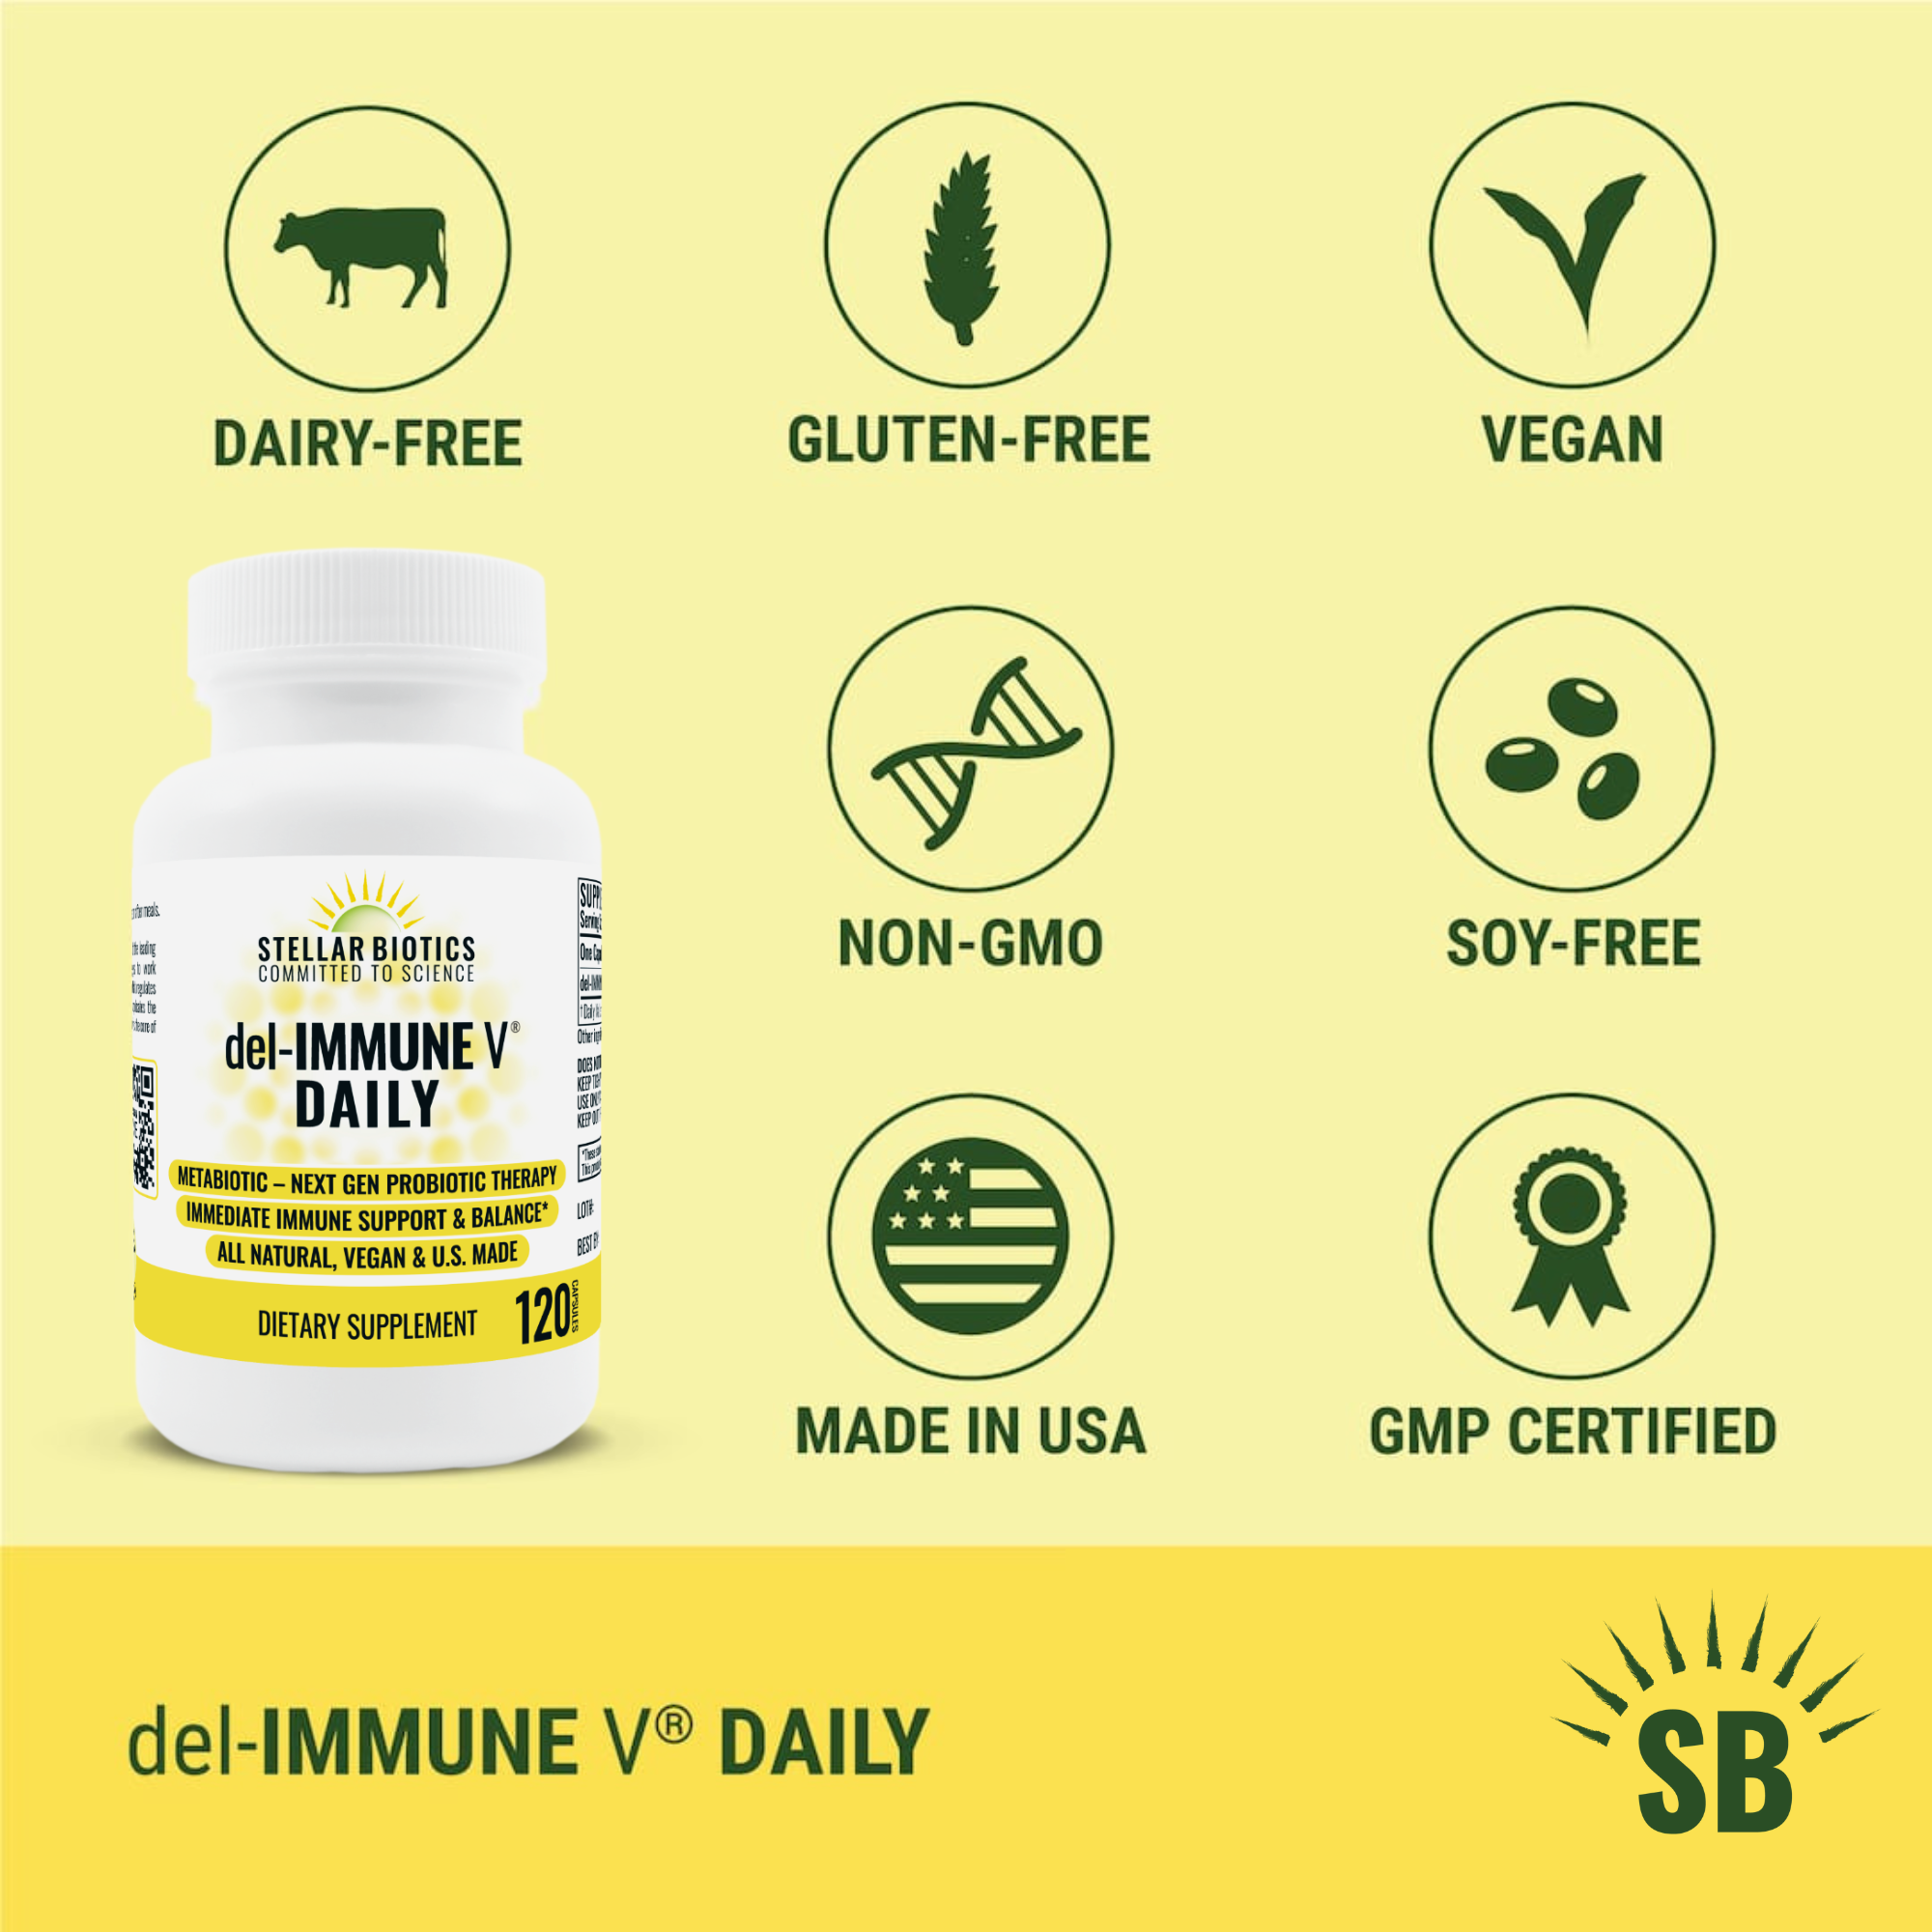 del-IMMUNE V® DAILY is All-Natural, Non-GMO, Dairy-Free, Gluten-Free, Soy-Free, GMP Certified, Made in USA